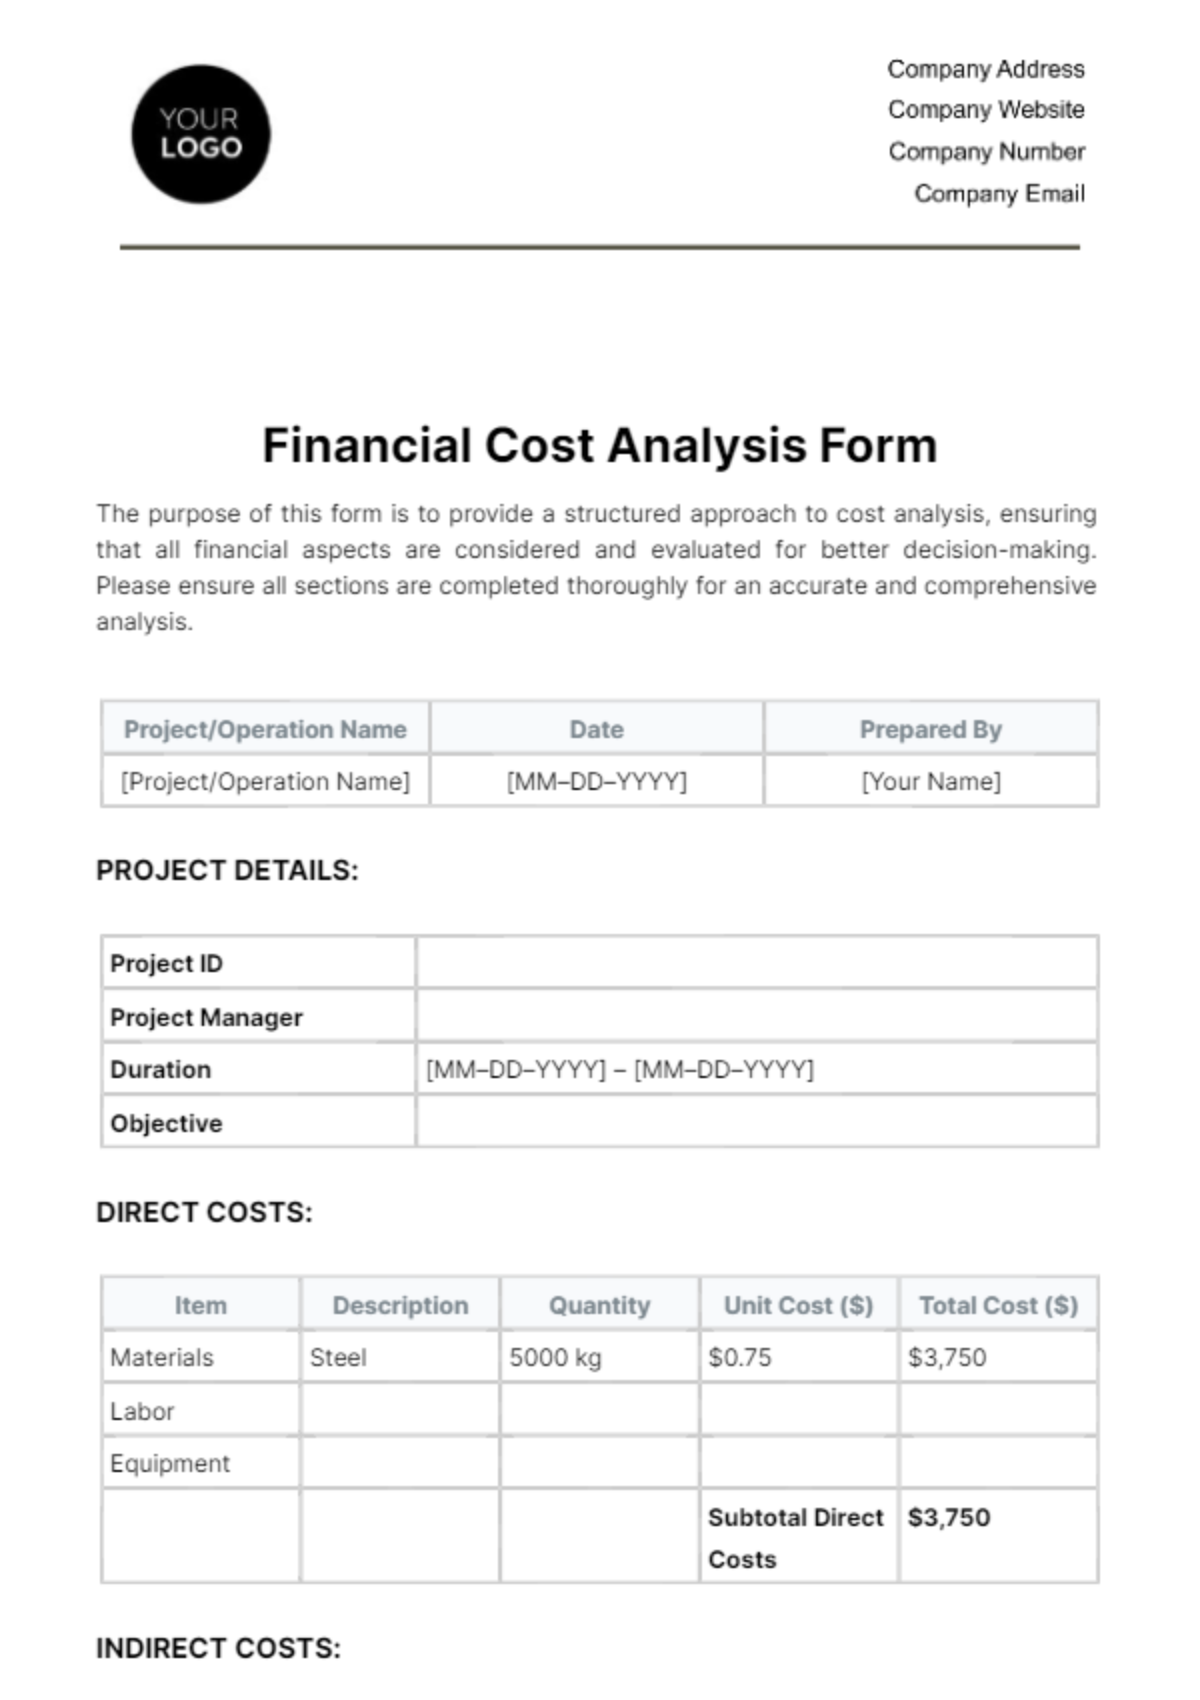 Free Financial Cost Analysis Form Template